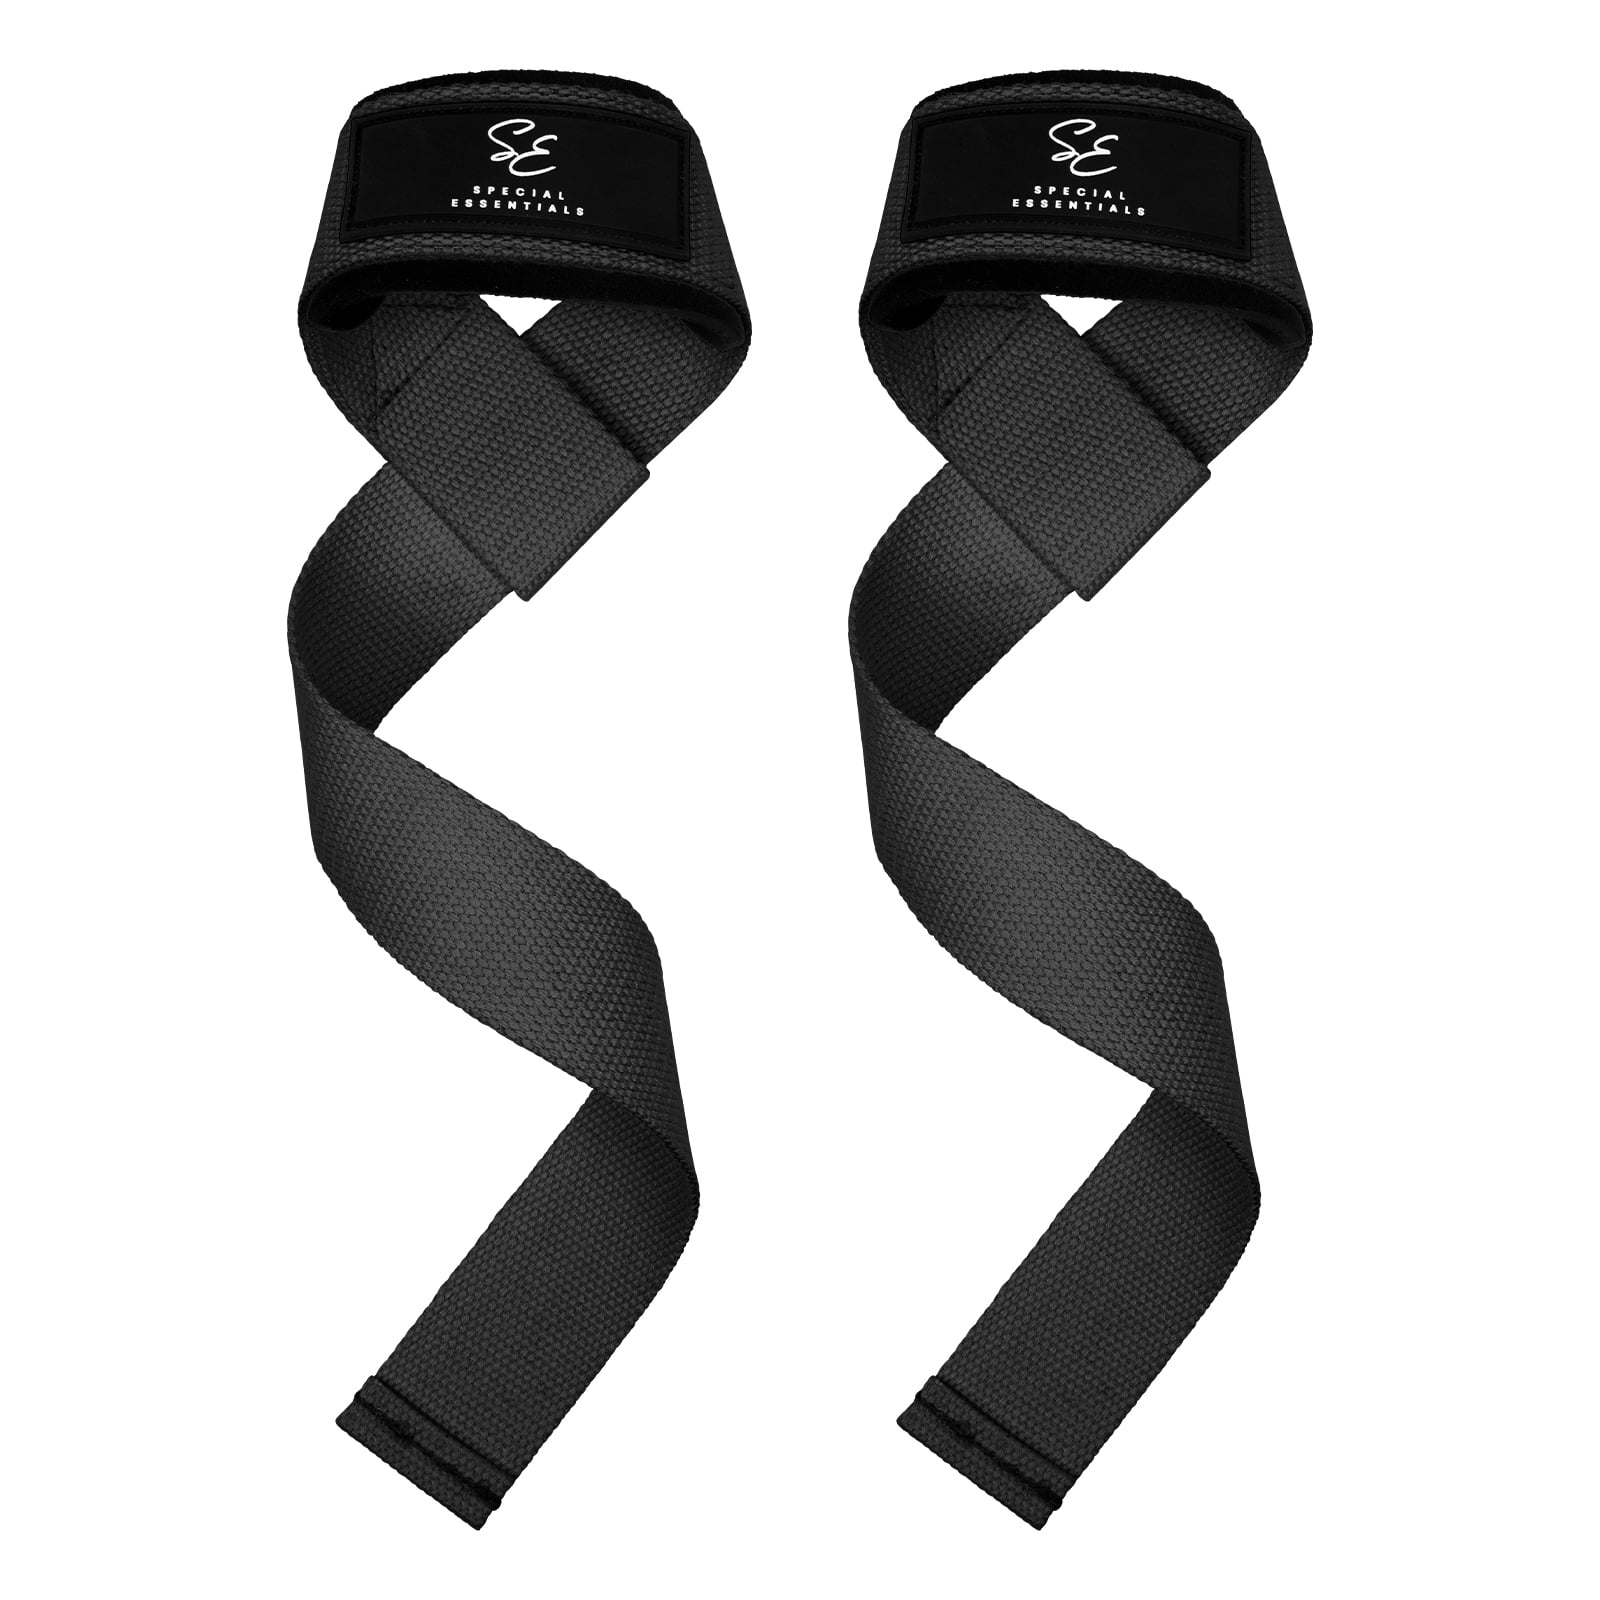 Wrist Wraps + Lifting Straps Bundle (2 Pairs) for Weightlifting, Cross  Training, Workout, Gym, Powerlifting, Bodybuilding - Support for Men/Women,  Avoid Injury During Weight Lifting 